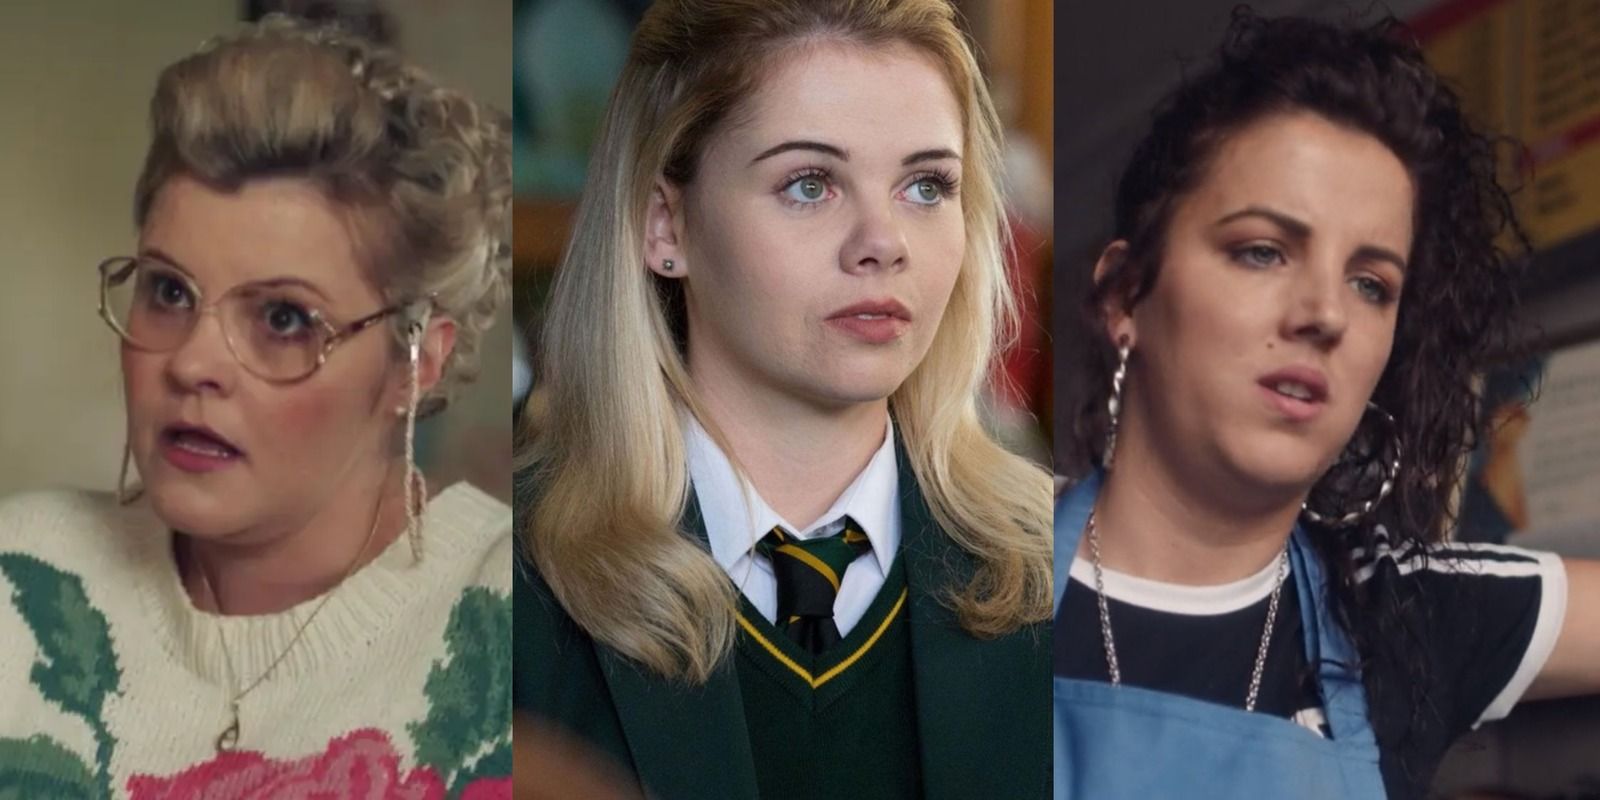 A split image features Derry Girls characters Mary, Erin, and Michelle